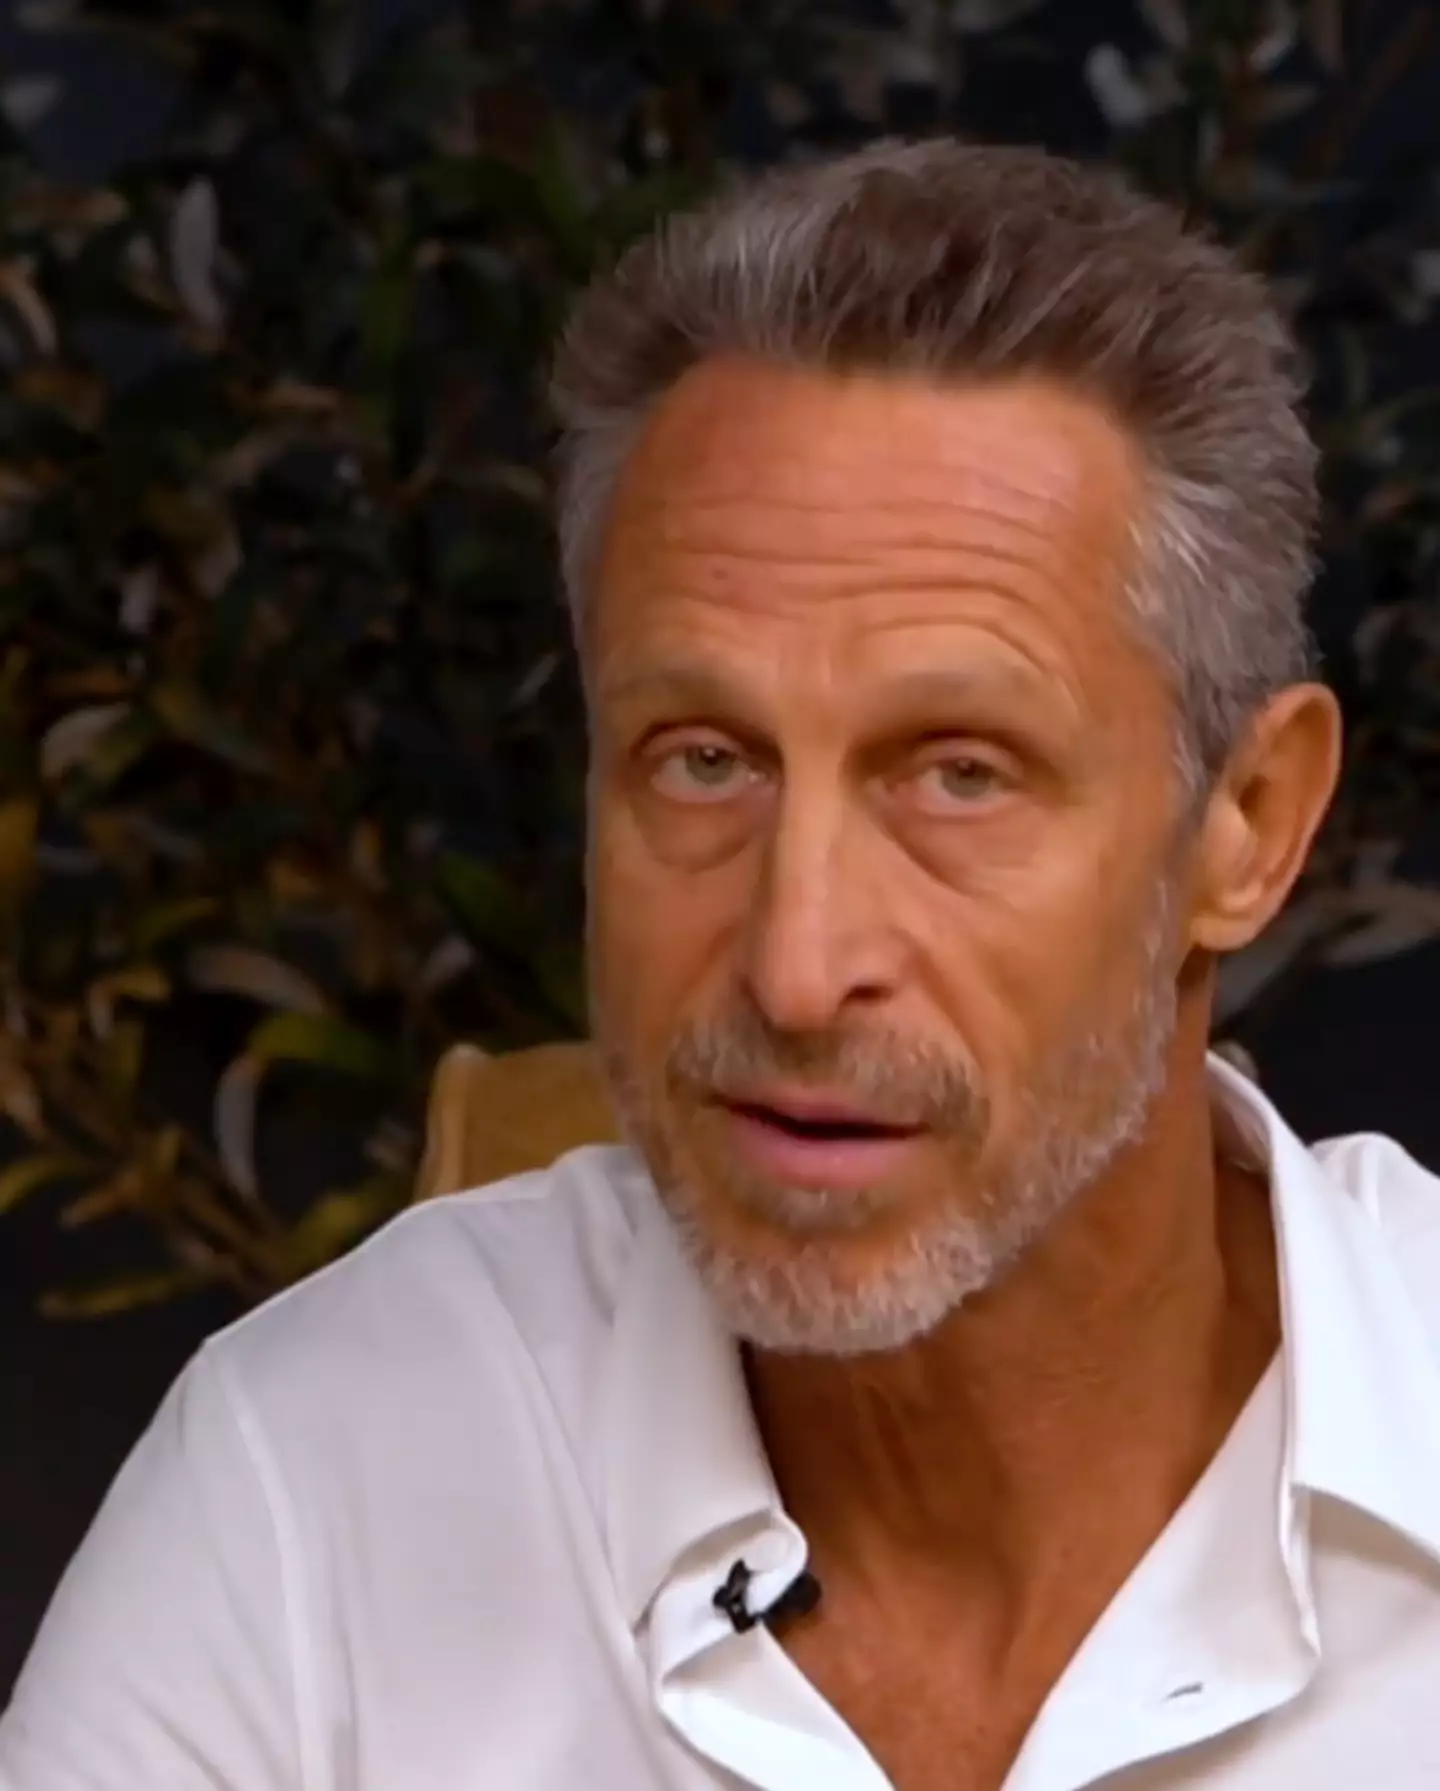 Dr Mark Hyman claims to have a biological age of 43.